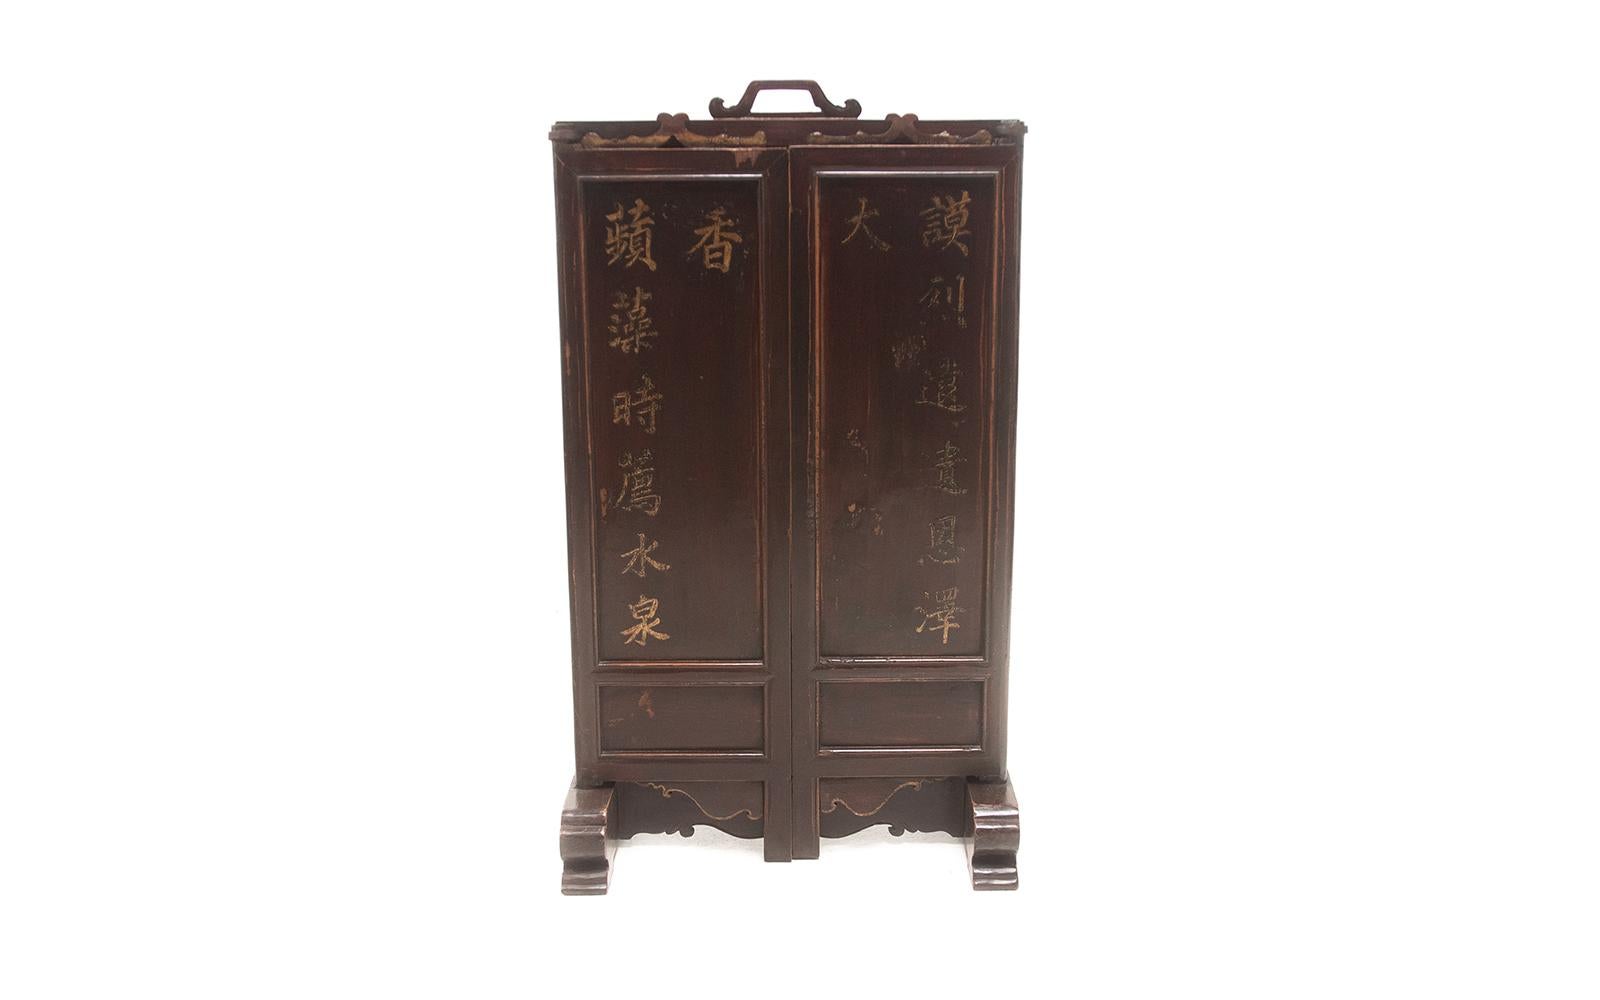 Early 20th century wood and lacquer Chinese ancestral folding table screen with inscriptions

A wood, cast iron lacquered Chinese ancestral folding table screen featuring inscriptions sits on sturdy feet. A wooden carved handle on the top to make